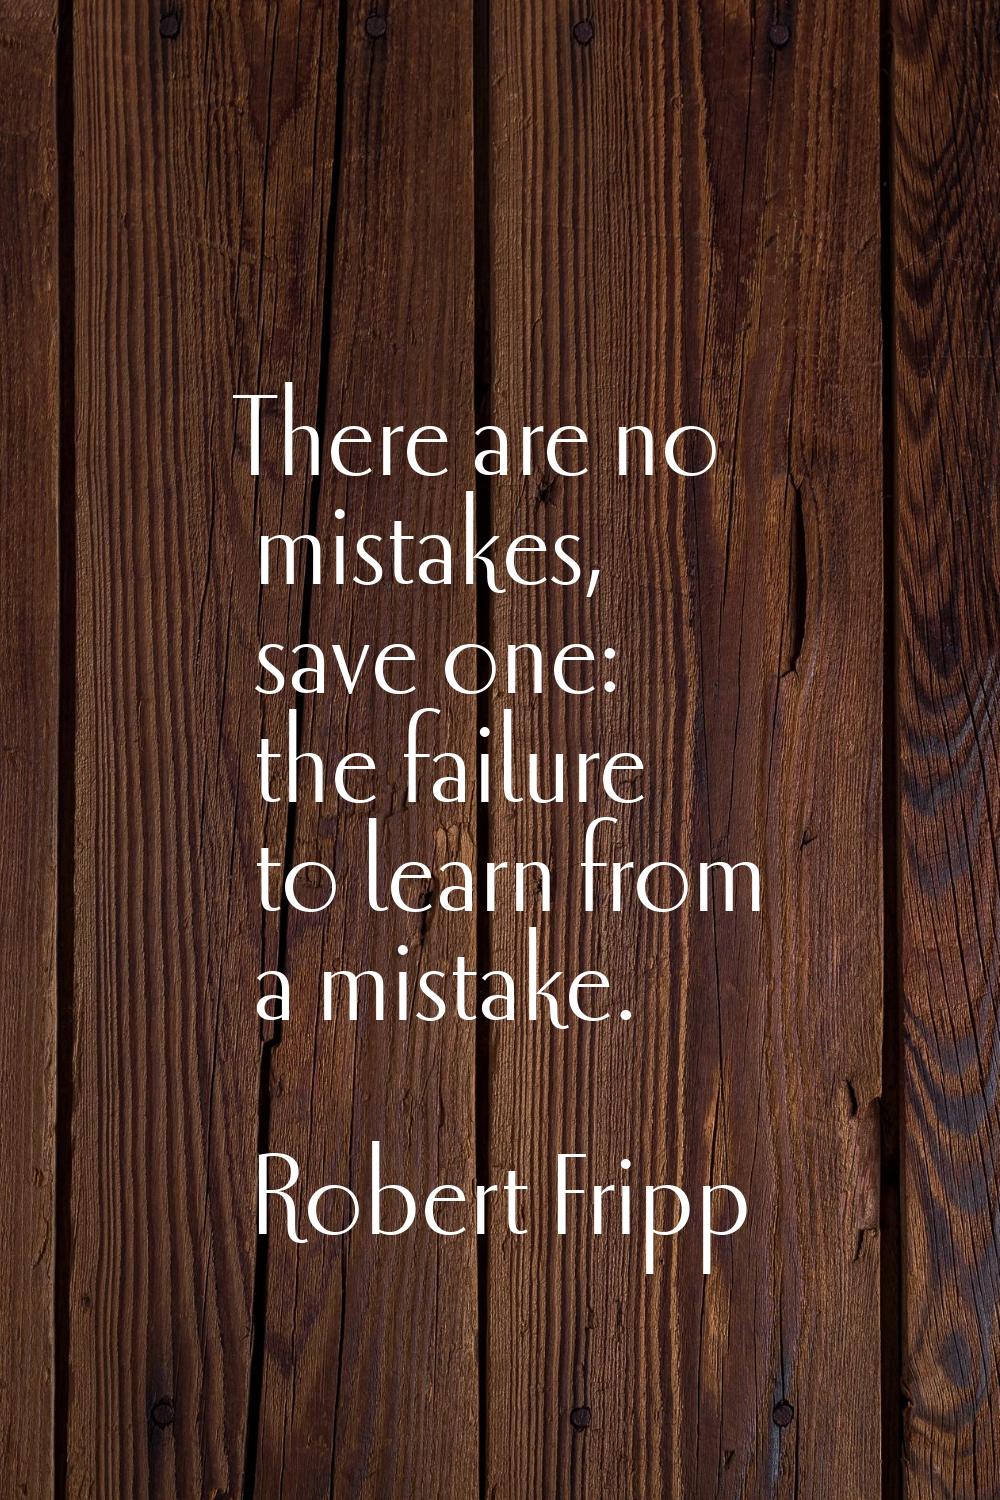 There are no mistakes, save one: the failure to learn from a mistake.